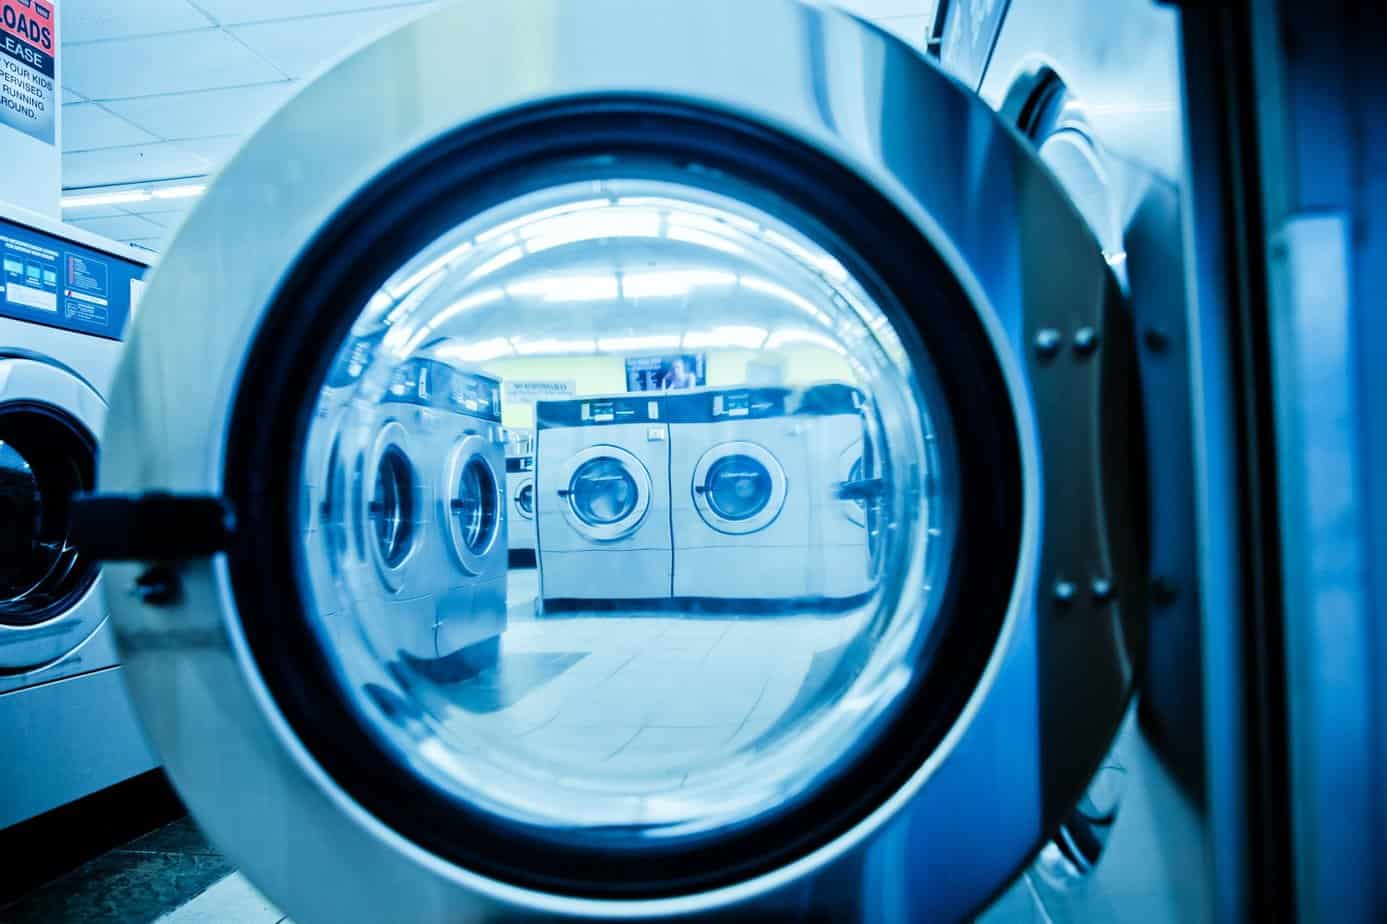 What to pay attention to when buying an electric clothes dryer?